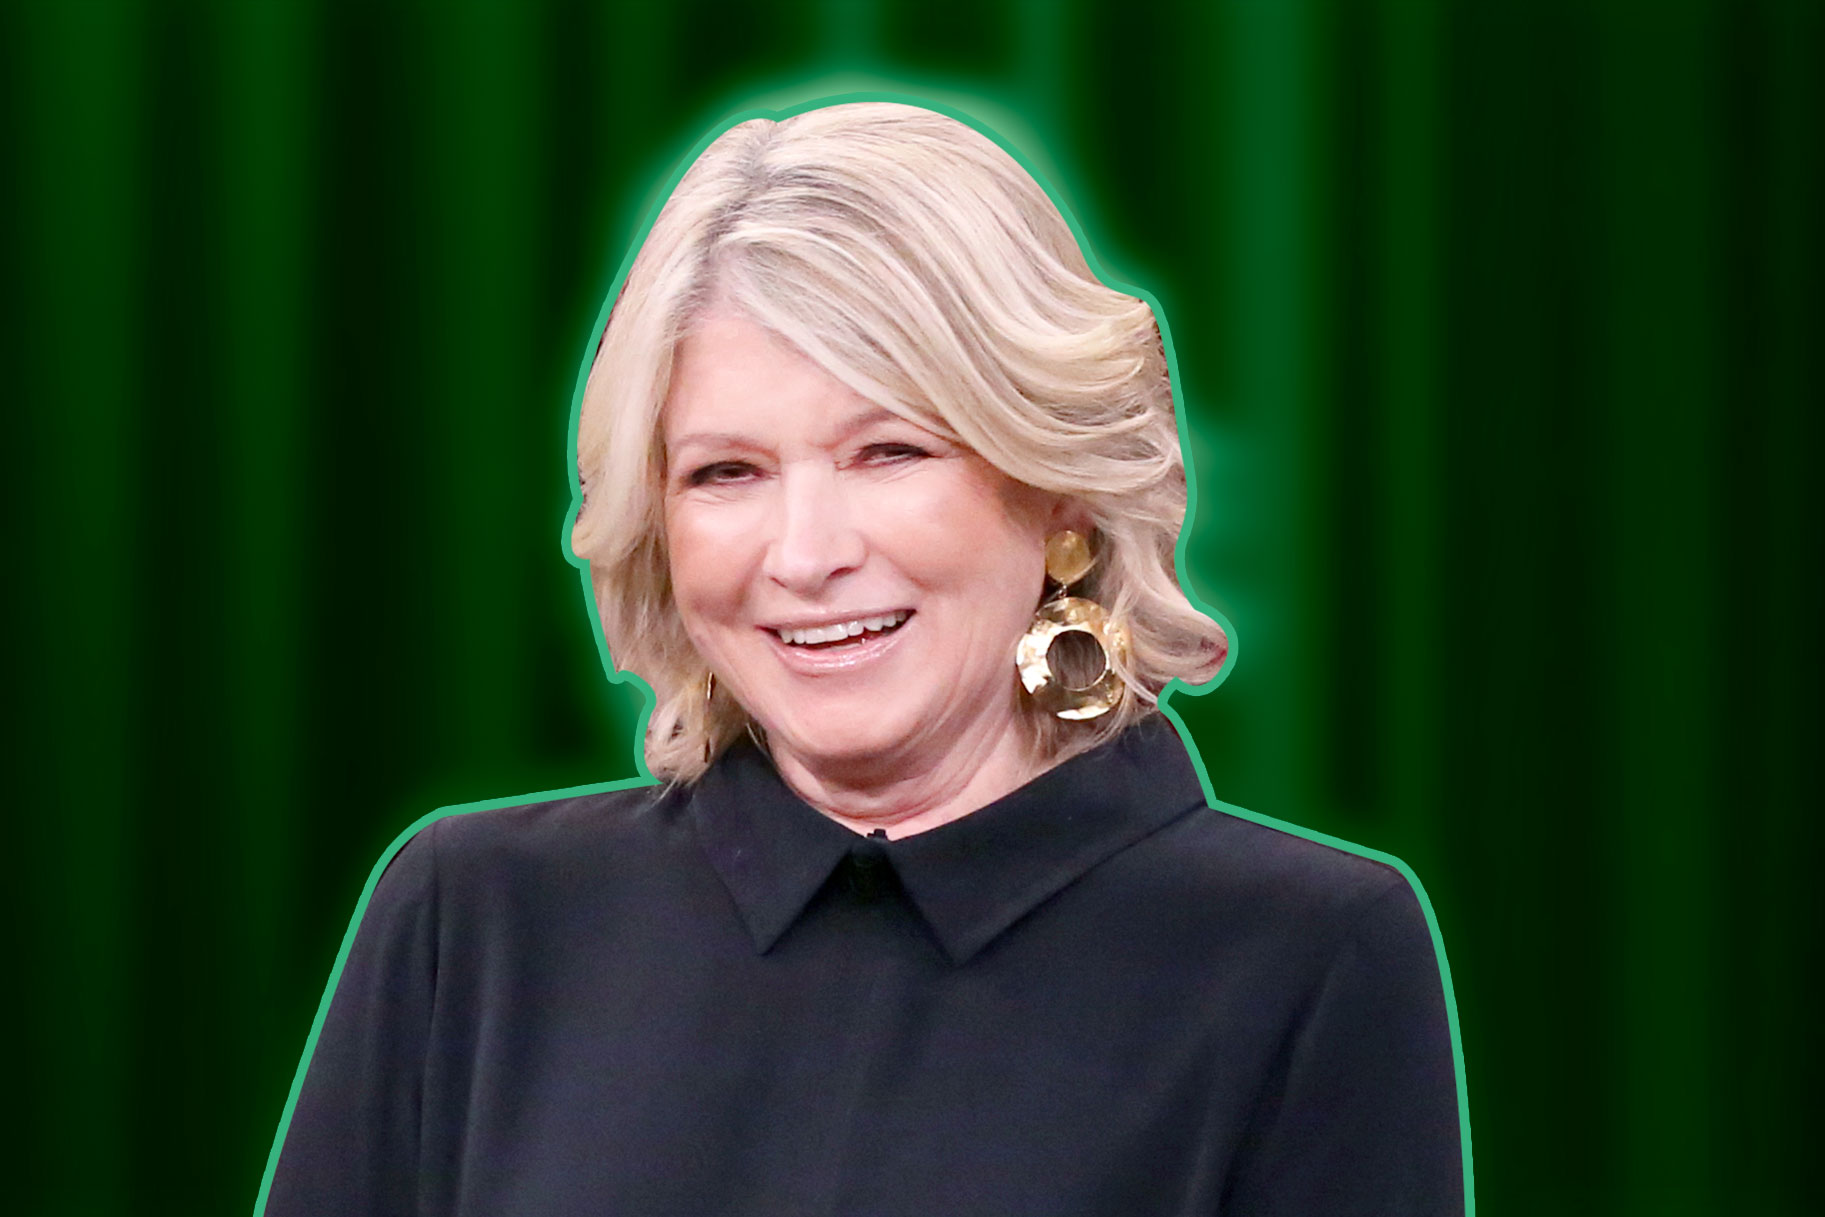 Martha Stewart Launching CBD Products With Canopy Growth